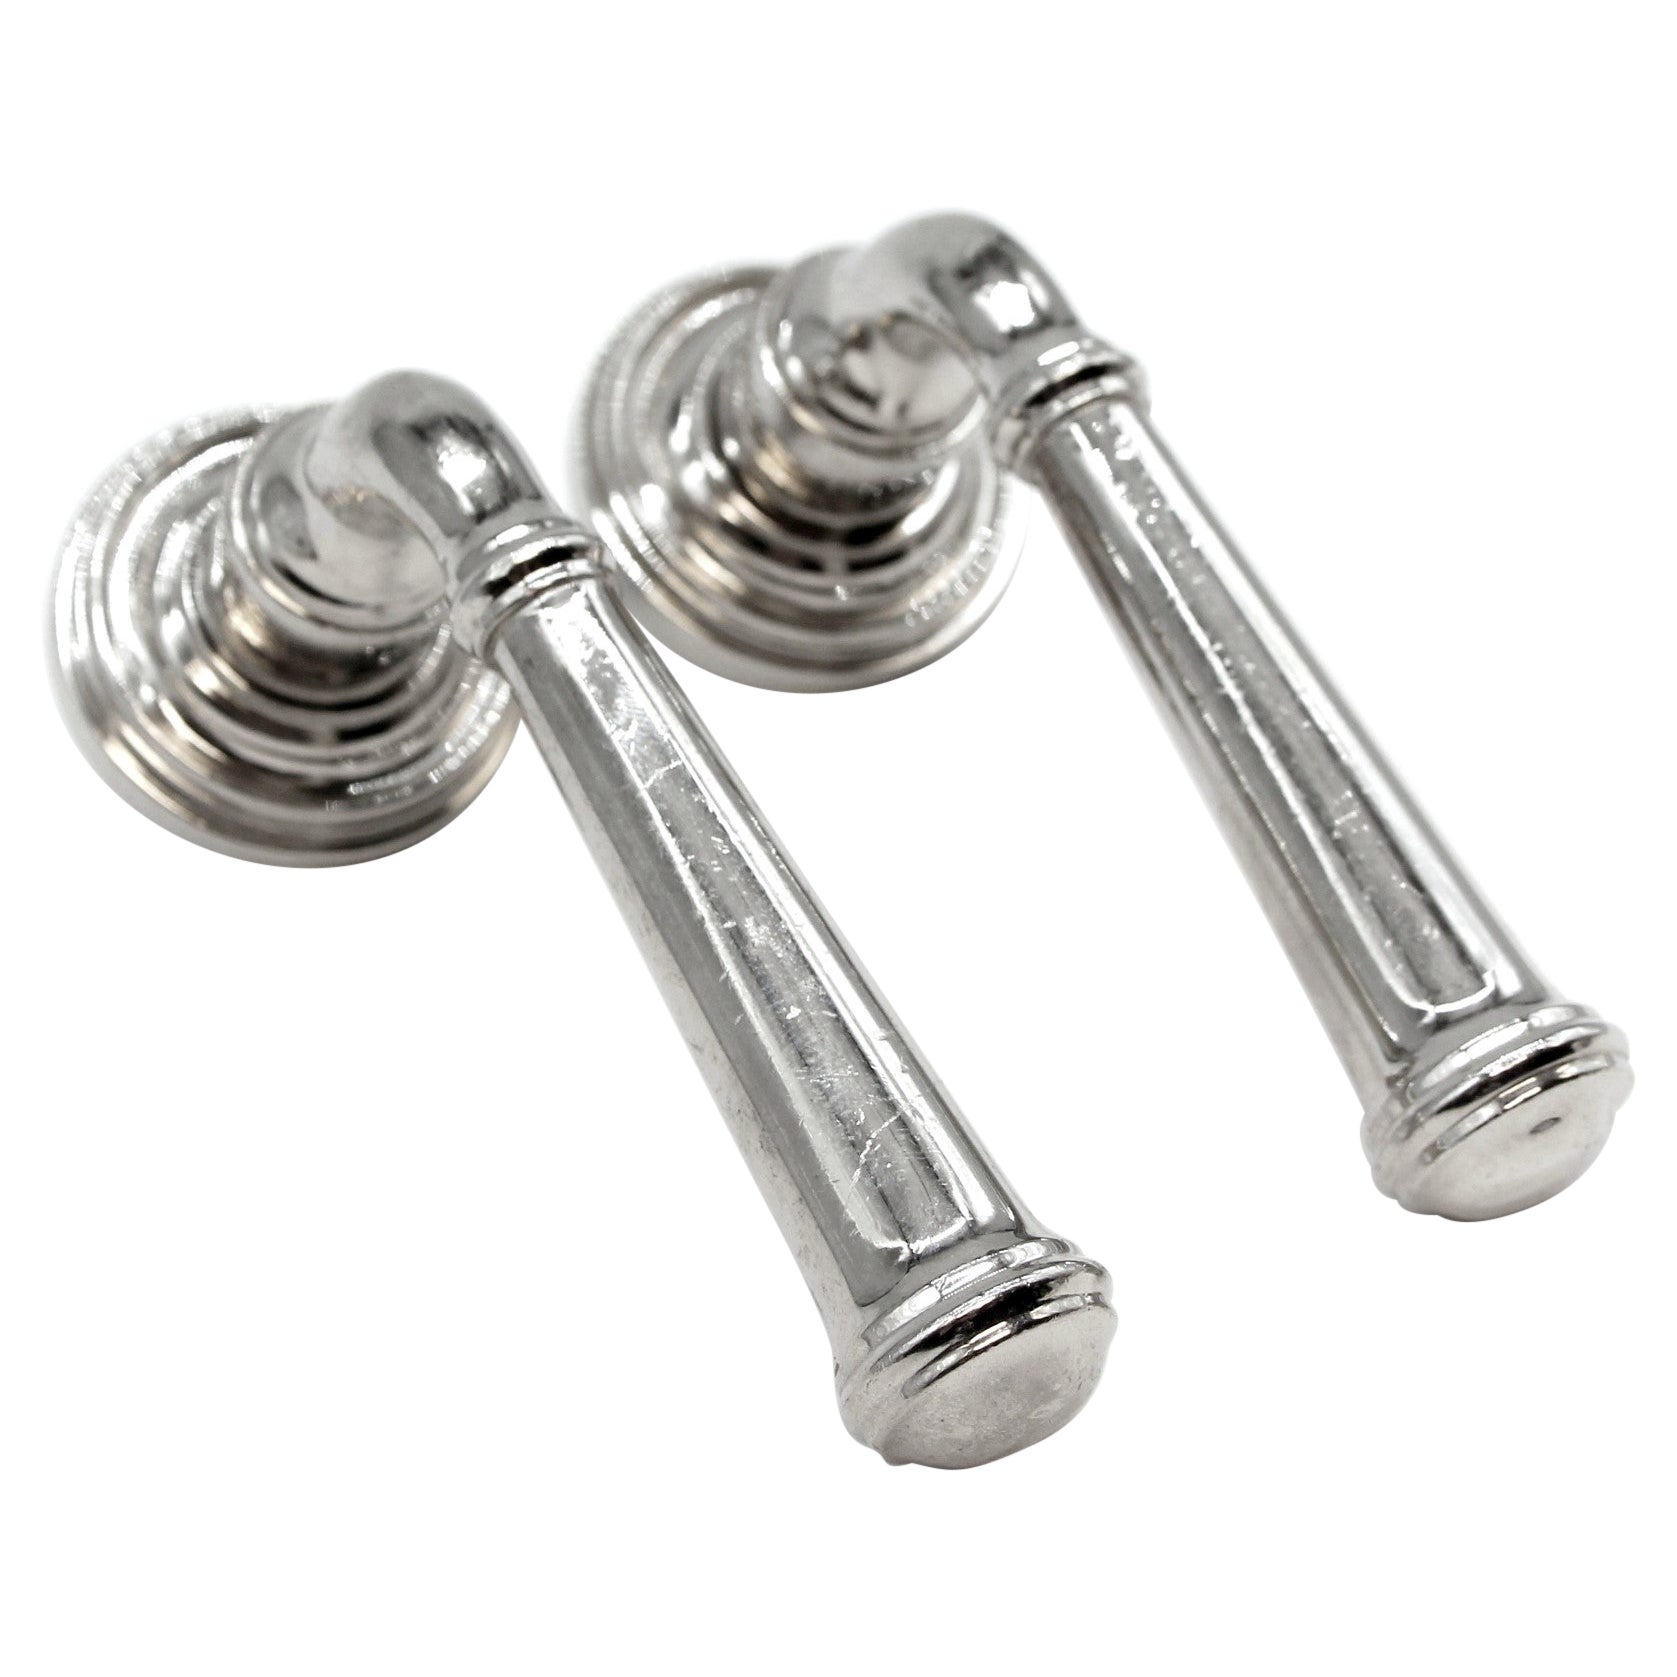 Chrome Plate Brass Fixed Lever Door Knob Set Qty. Available For Sale